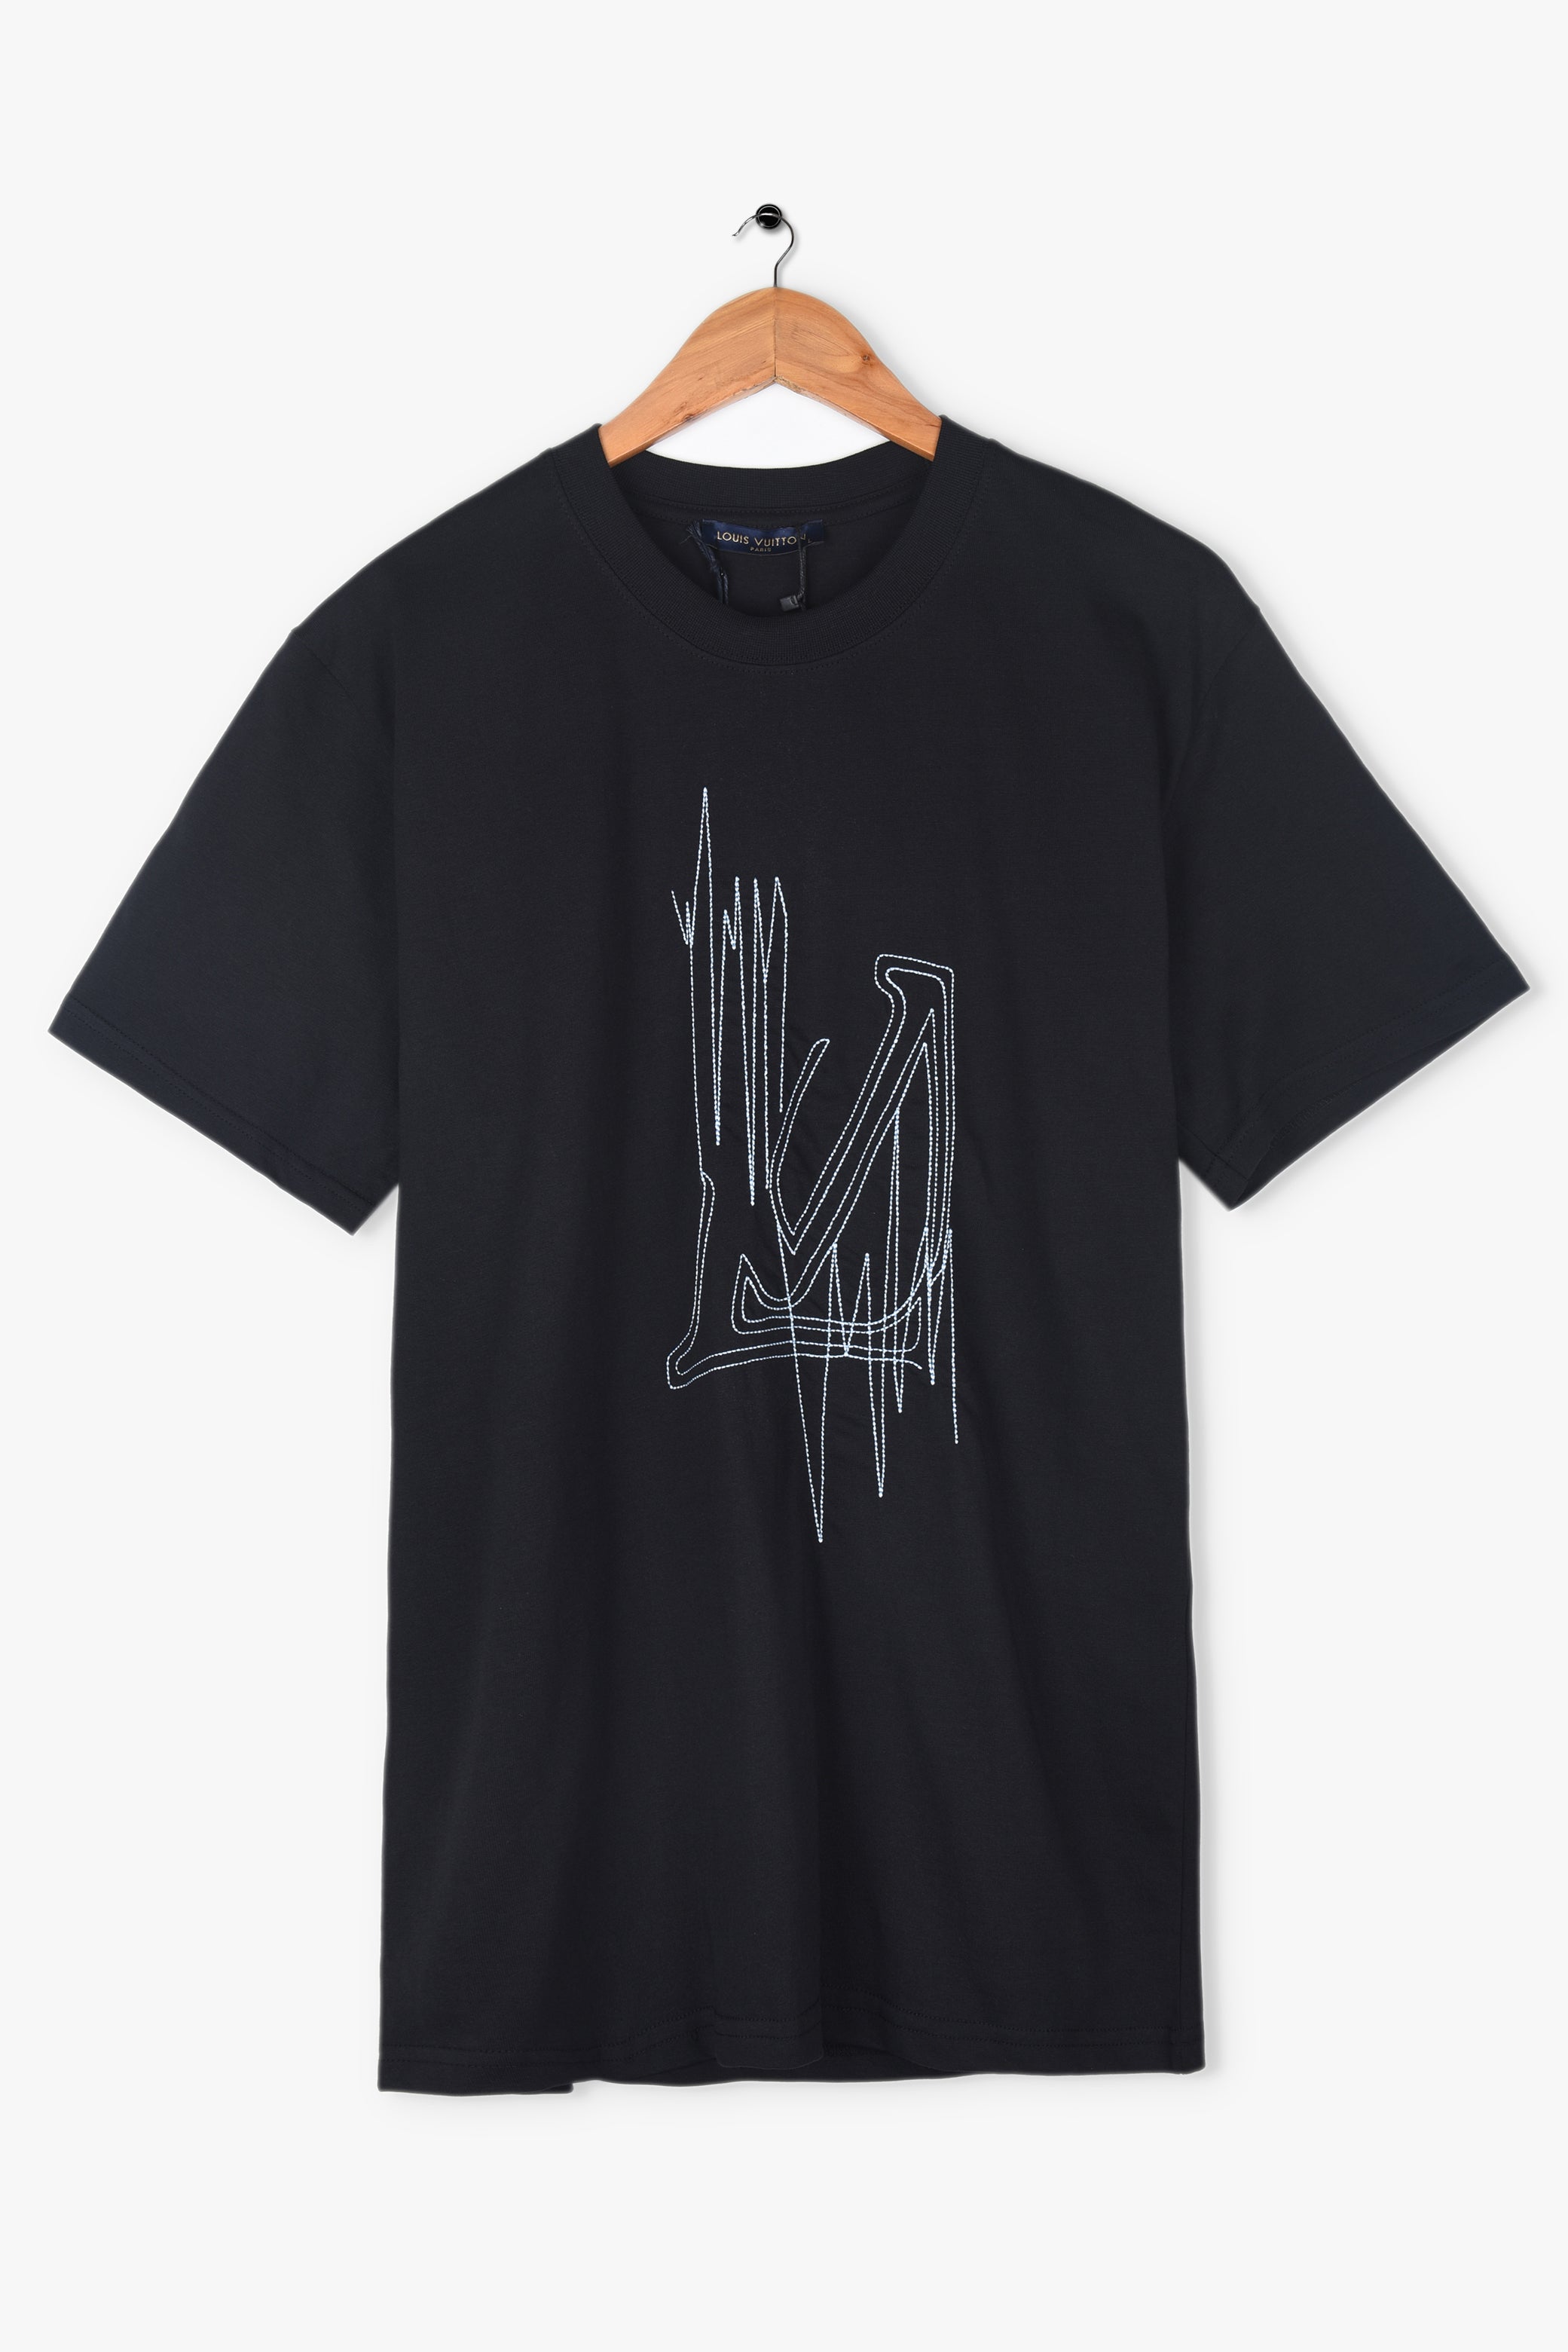 Official louis Vuitton LV Frequency T-shirt - 2020 Trending Tees